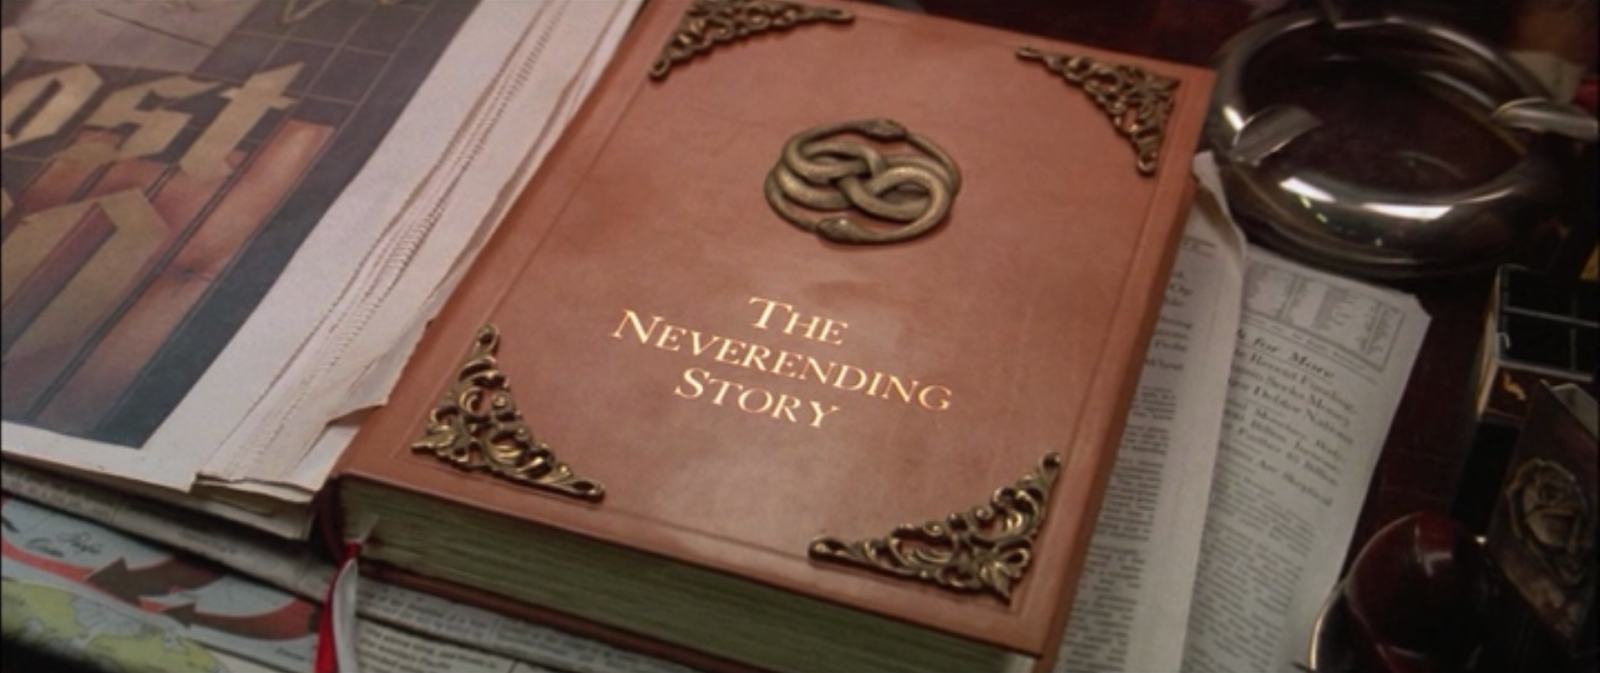 A scene from The Neverending Story